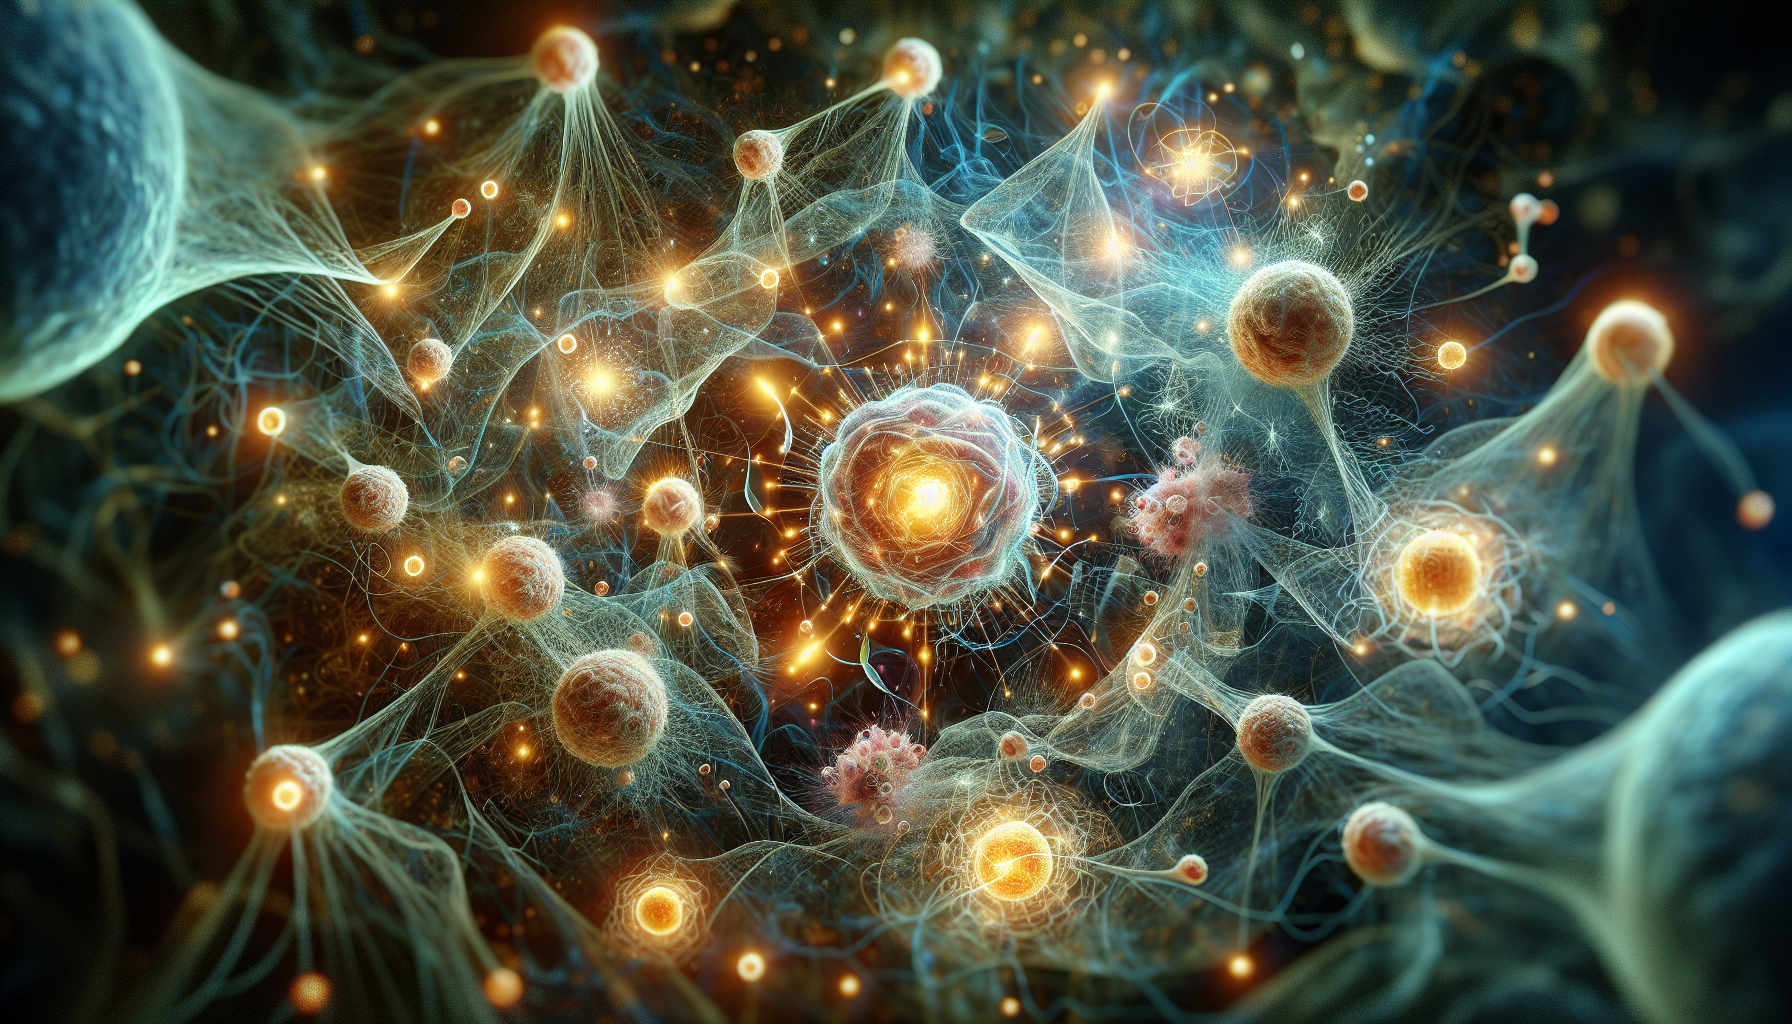 Artistic depiction of immune cells and signaling pathways influenced by fisetin